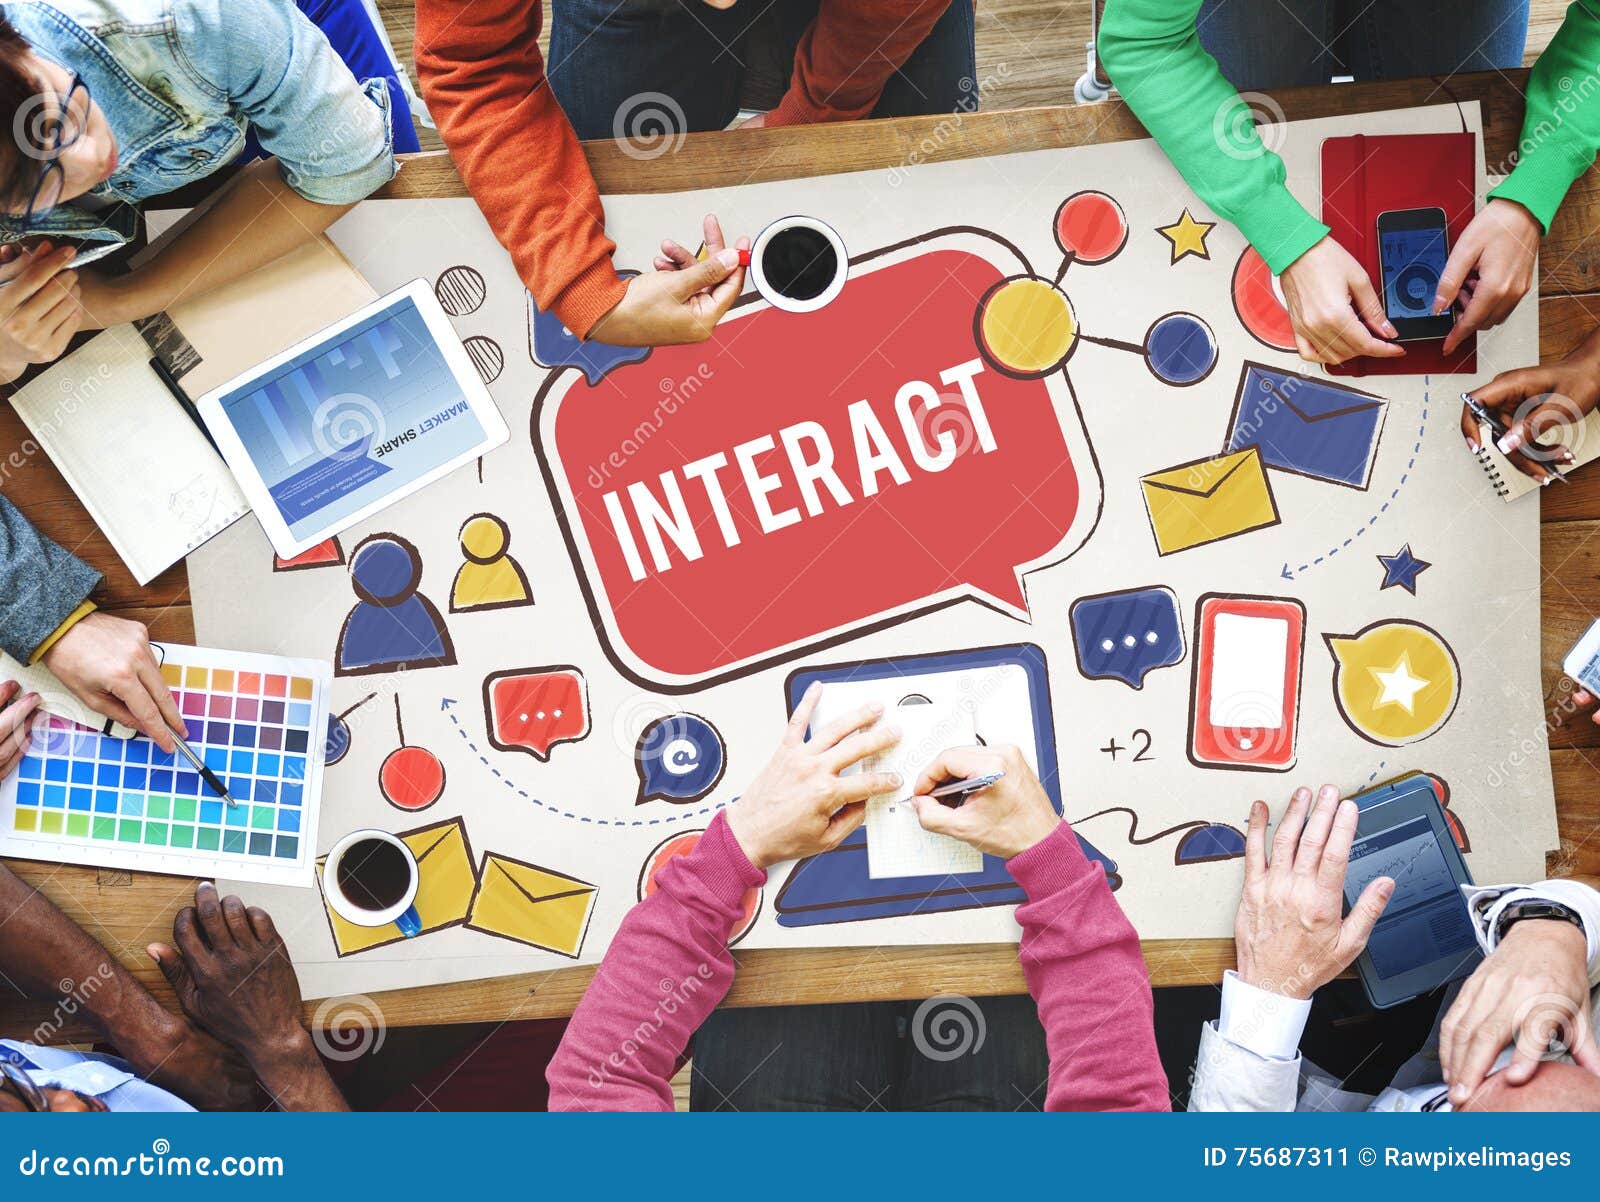 interact communicate connect social media social networking concept